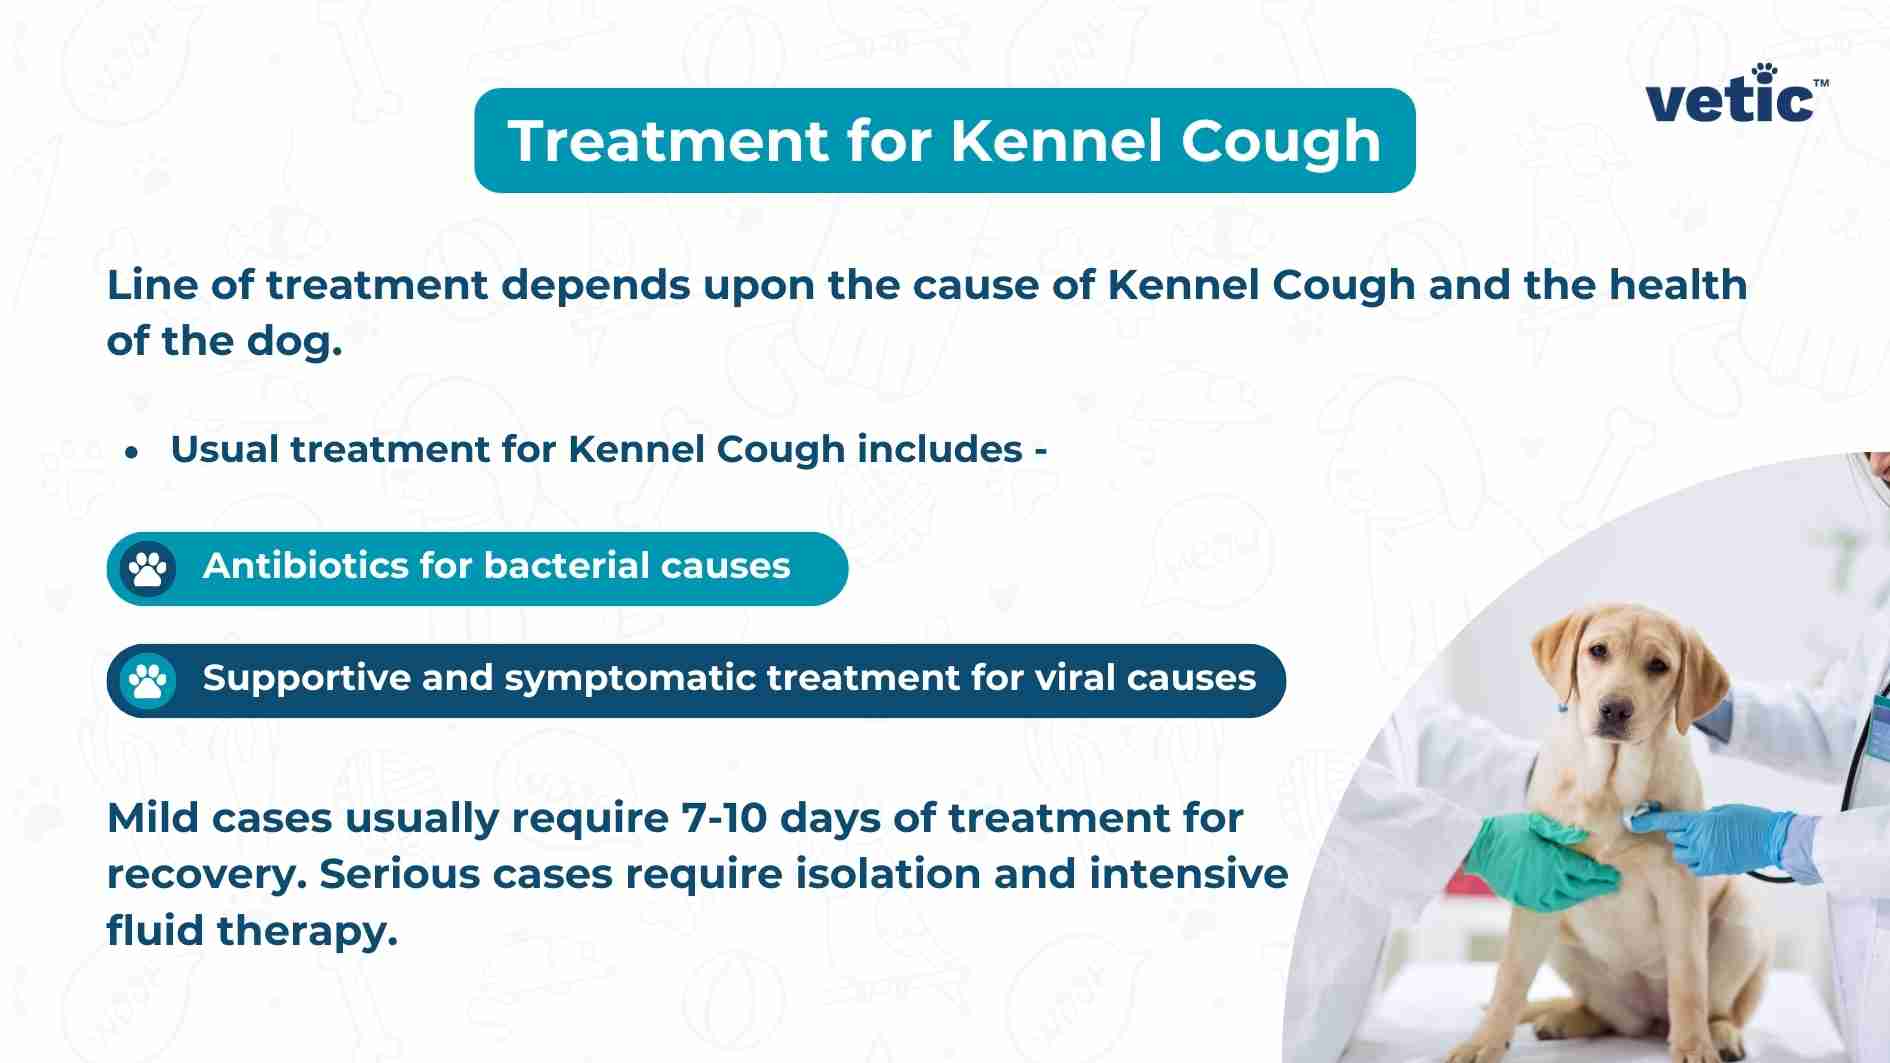 The image is an informational graphic on a light blue background with a watermark of dog icons. It’s titled “Treatment for Kennel Cough” in bold letters at the top. There is a logo “vetiC™” at the top right corner. The main content explains that the line of treatment depends upon the cause of Kennel Cough and health of the dog. Two specific treatments are listed: antibiotics for bacterial causes, marked with a blue icon; supportive and symptomatic treatment for viral causes, marked with a green icon. Additional information states that mild cases usually require 7-10 days of treatment for recovery while serious cases need isolation and intensive fluid therapy. On the right side, there is an image of a Labrador Retriever puppy being examined by veterinarians for cough and congestion using a stethoscope on the pup's chest